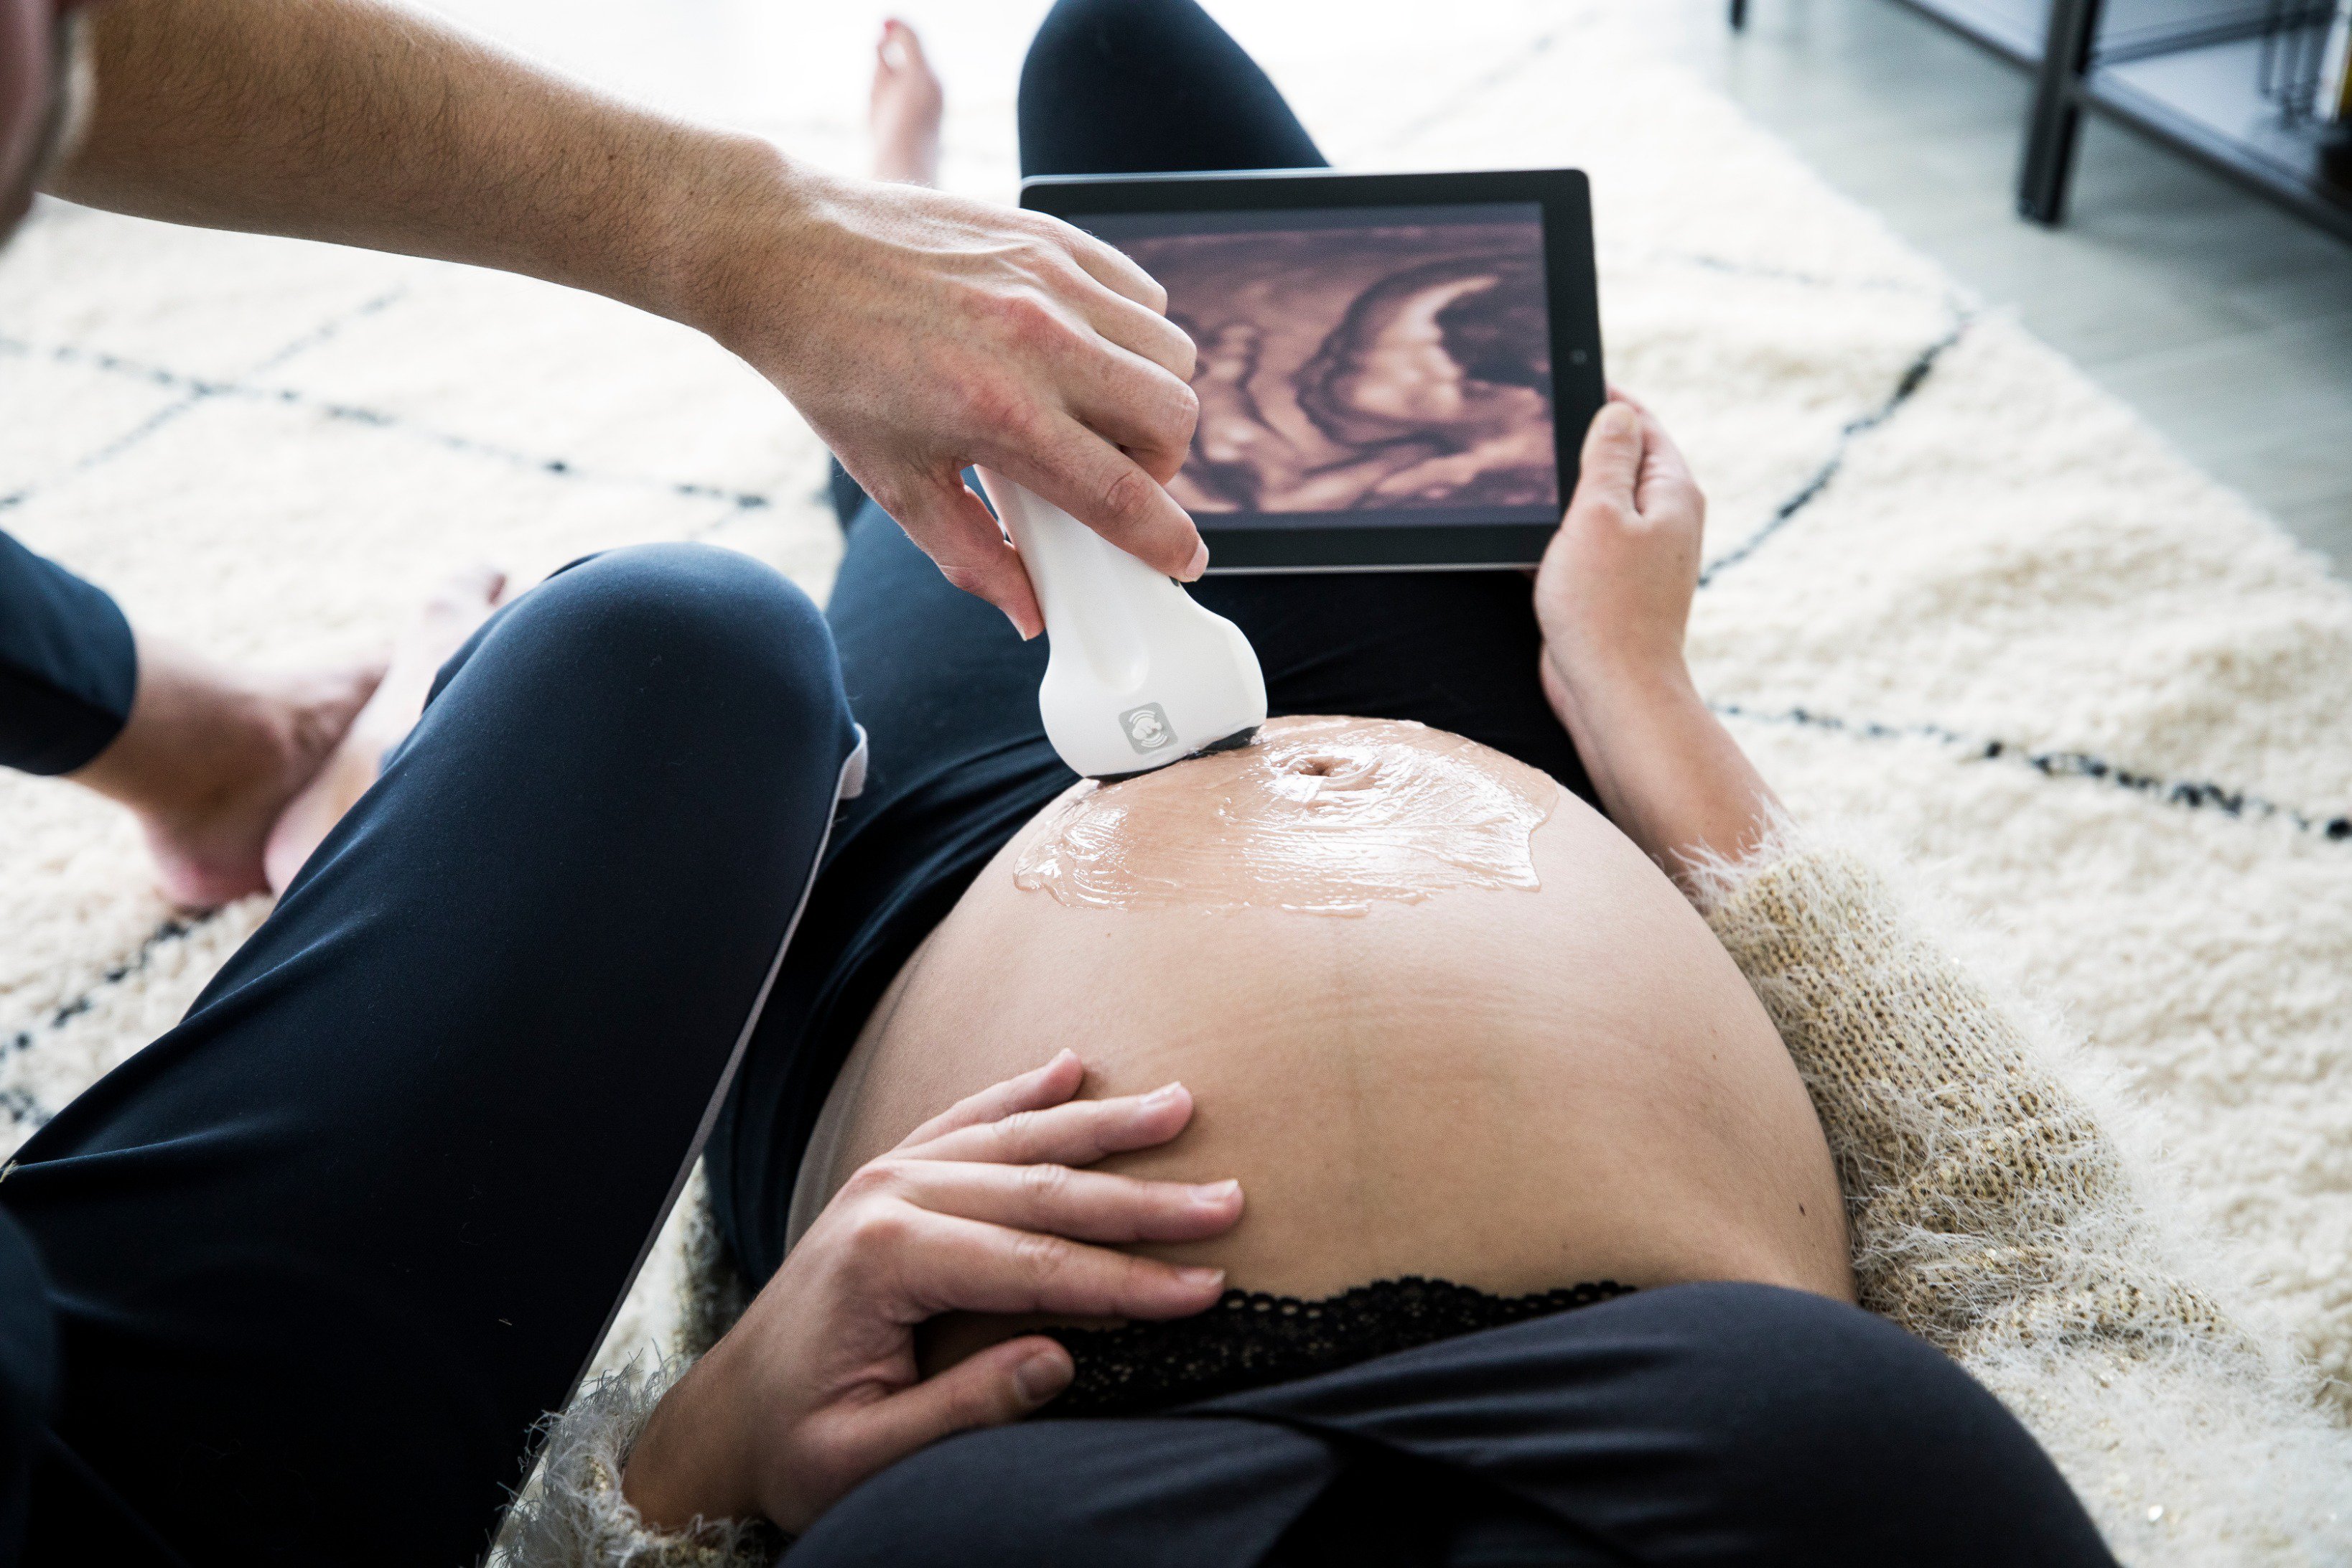 Baby-Scan on Twitter: "In January we launch the world's first 2D and 3D ultrasound scanner home use! #babyscan #launch #newtechnology # ultrasound #firsttweet #mijneerstetweet #pregnant #pregnancy #Tweet babies https://t.co/8Kl7e33MP2" / Twitter